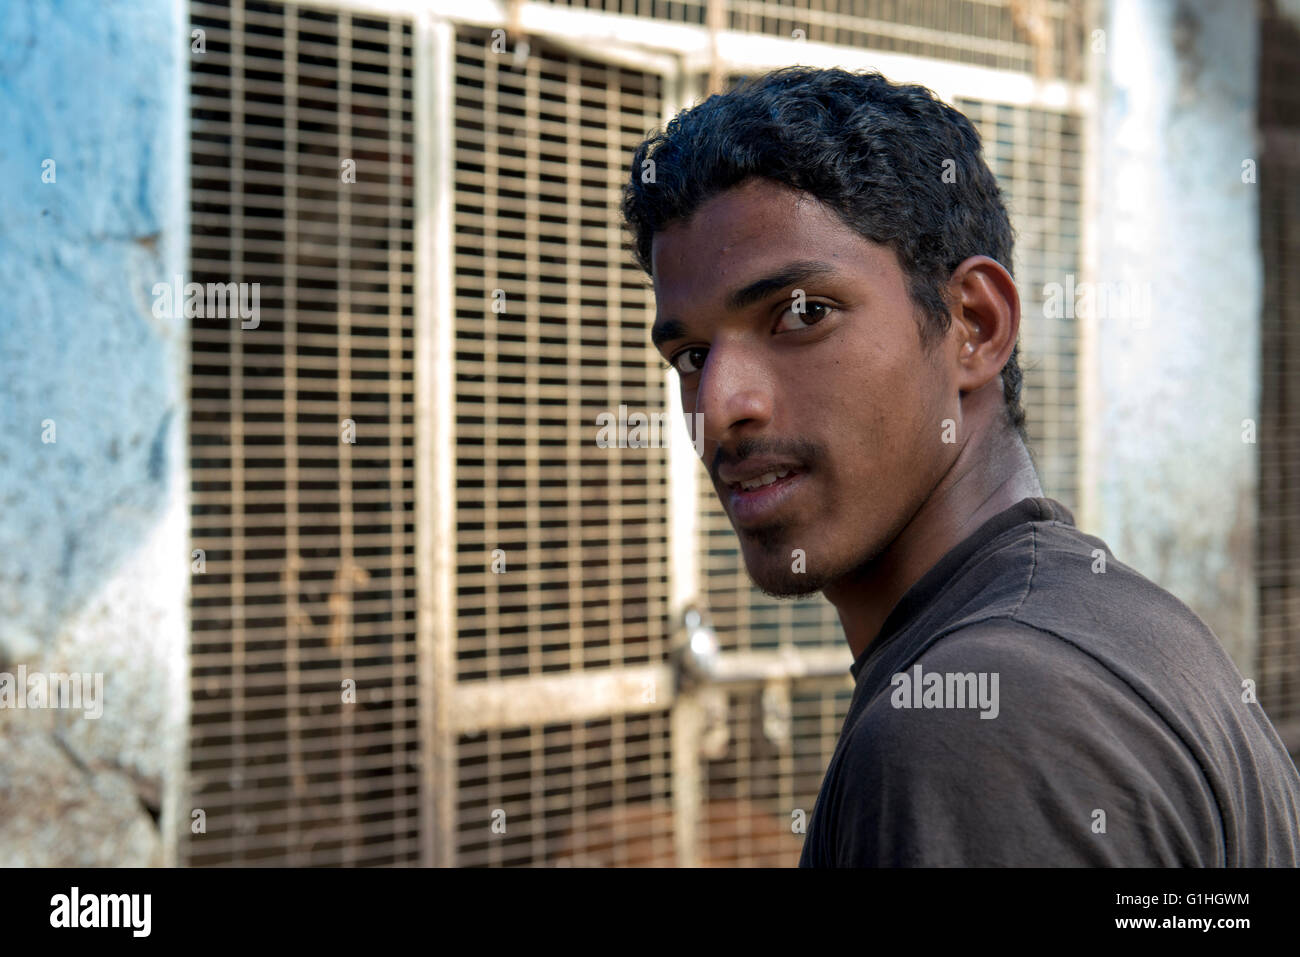 Man At Poultry Market, Hyderabad Stock Photo - Alamy